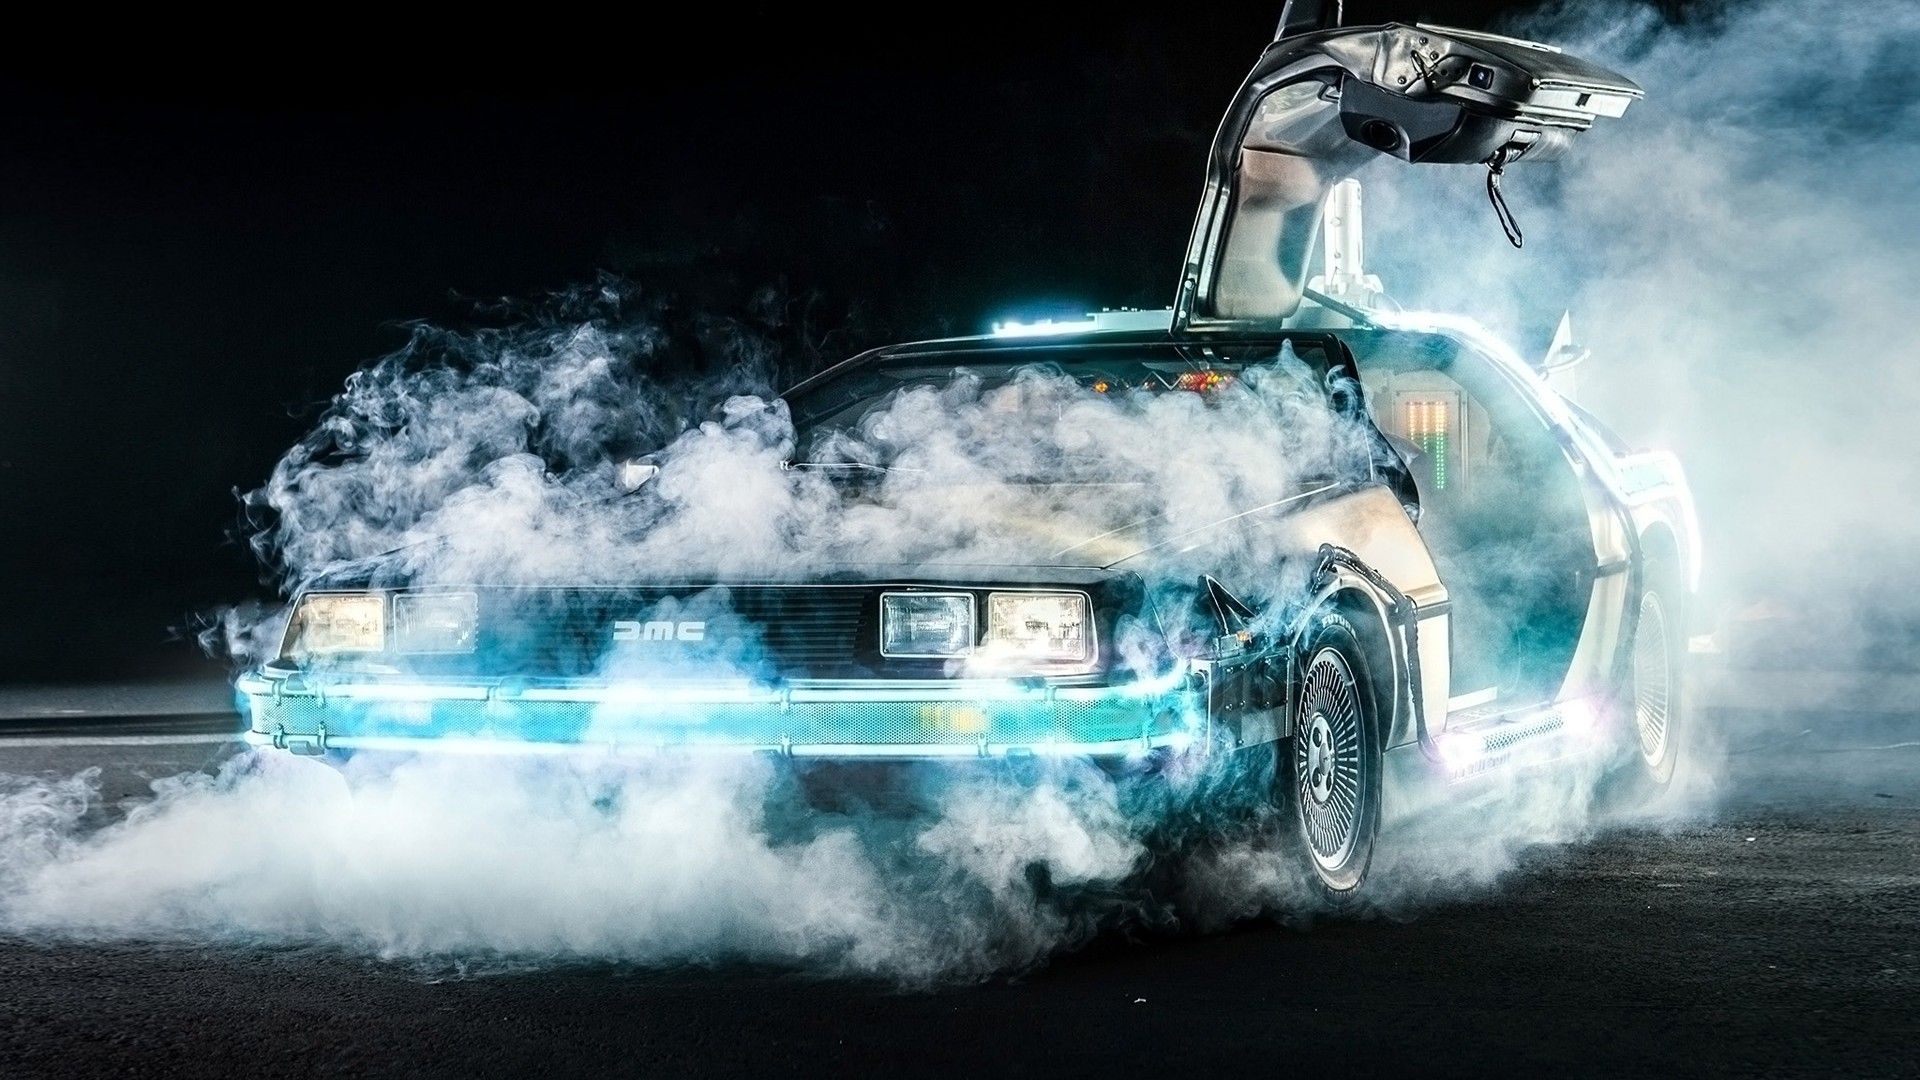 #movies, #Back to the Future, #time travel, #DeLorean